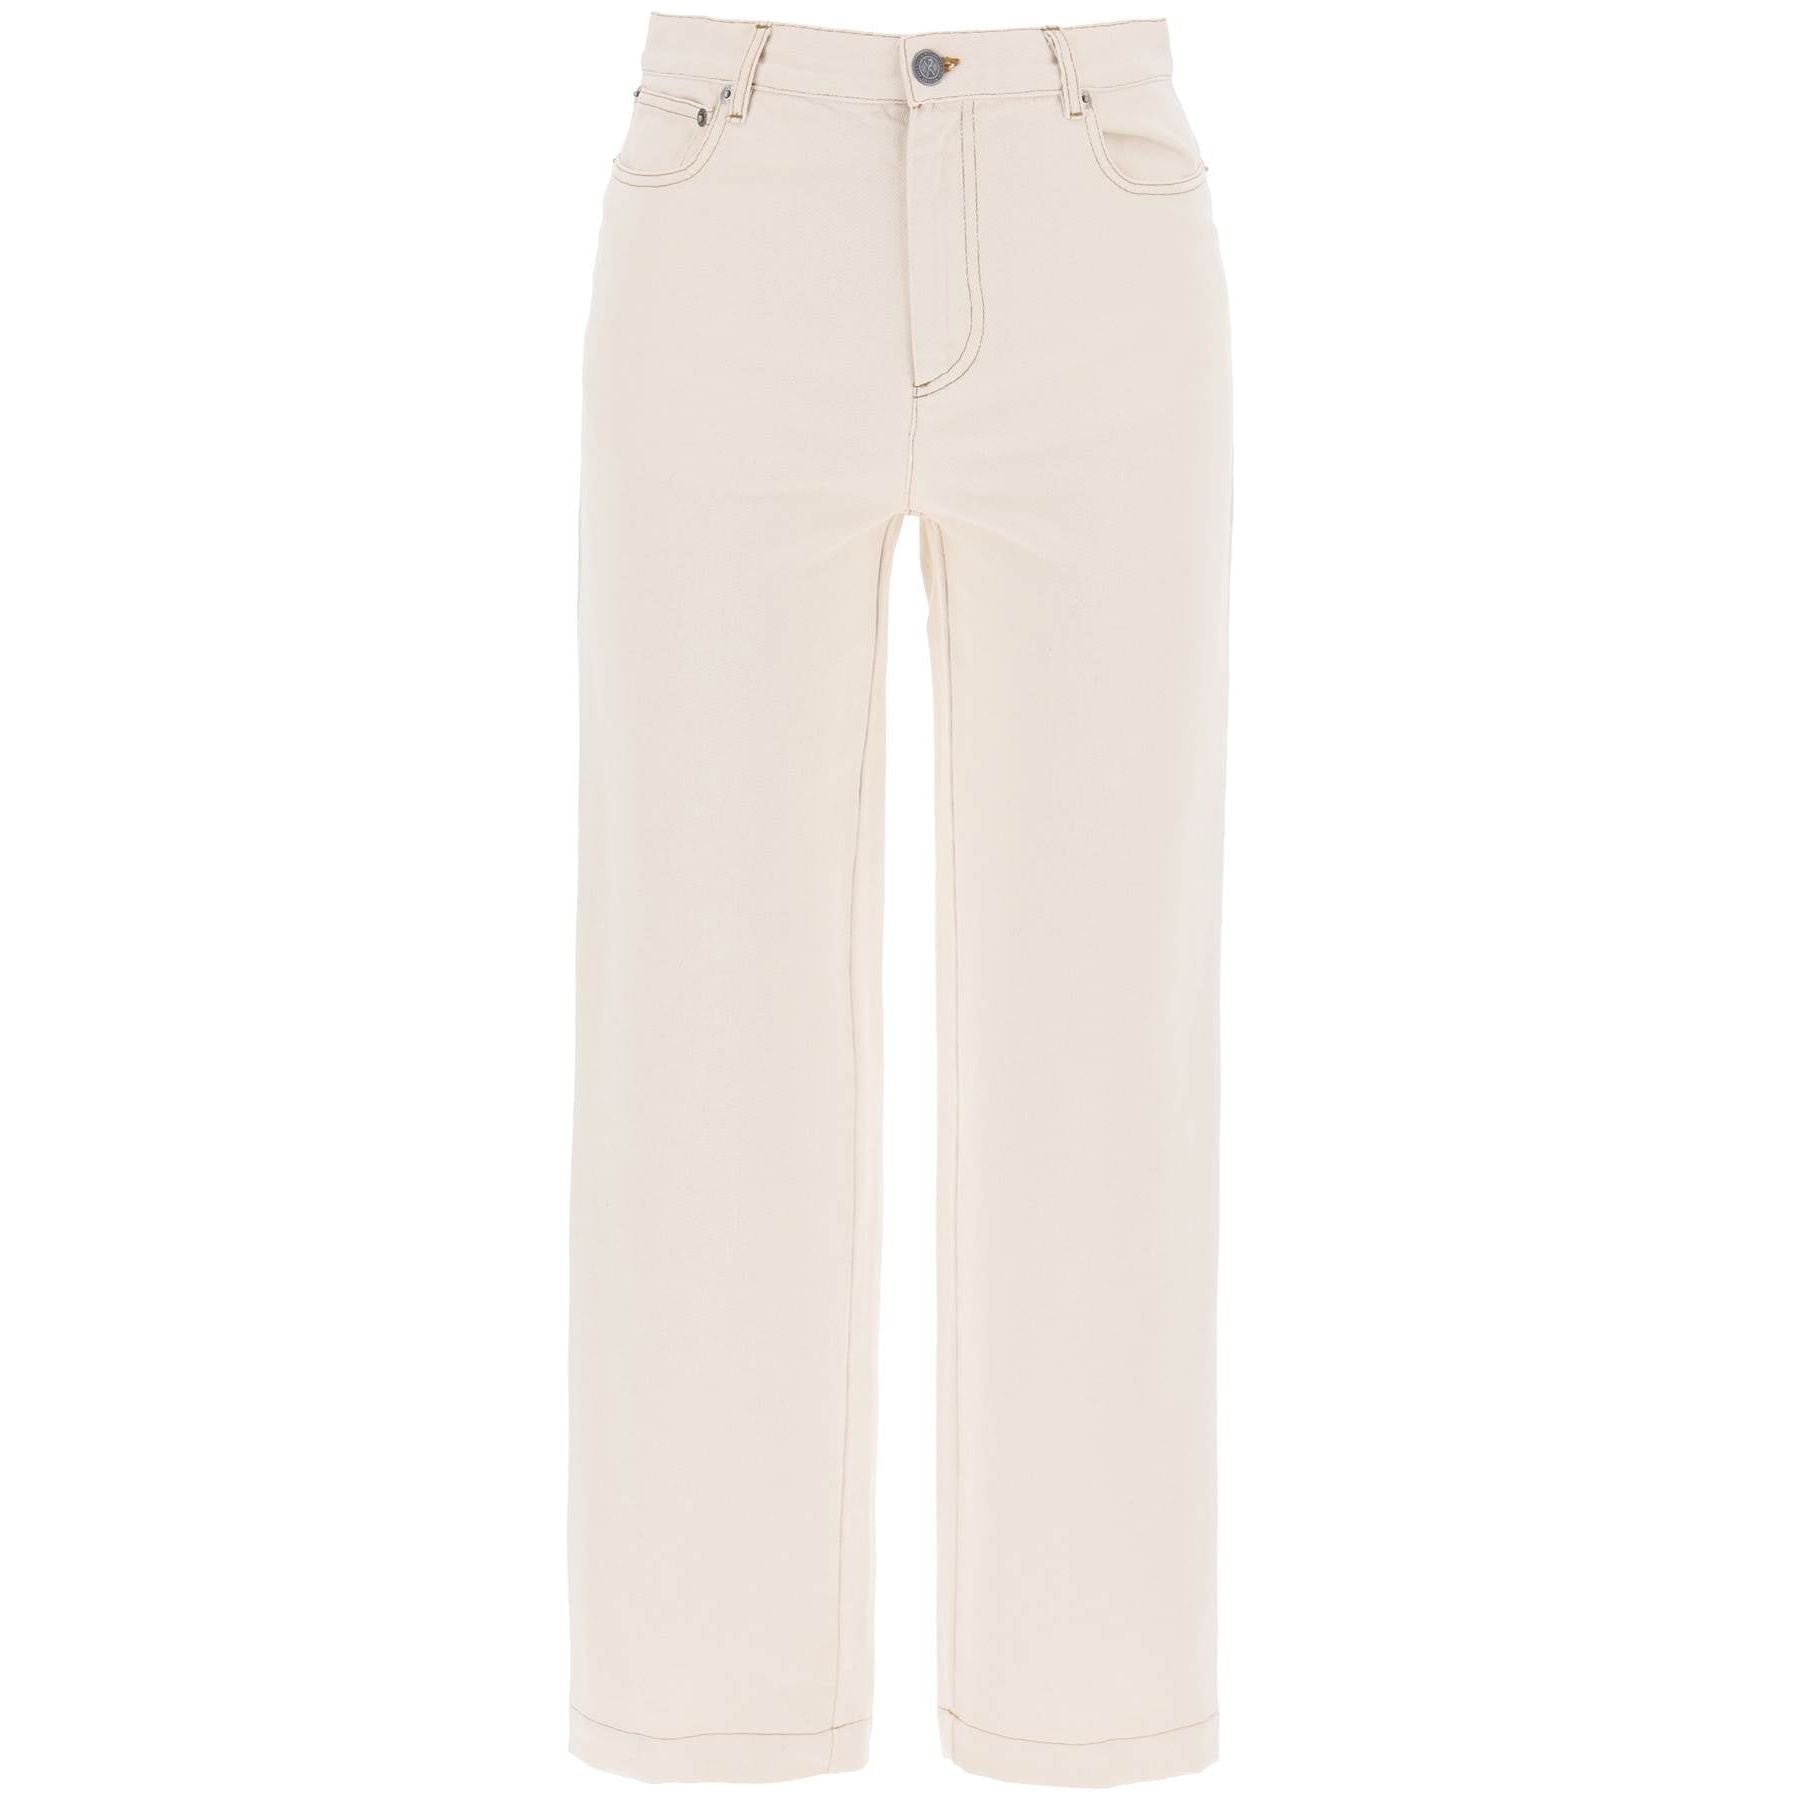 New Sailor Cropped Jeans